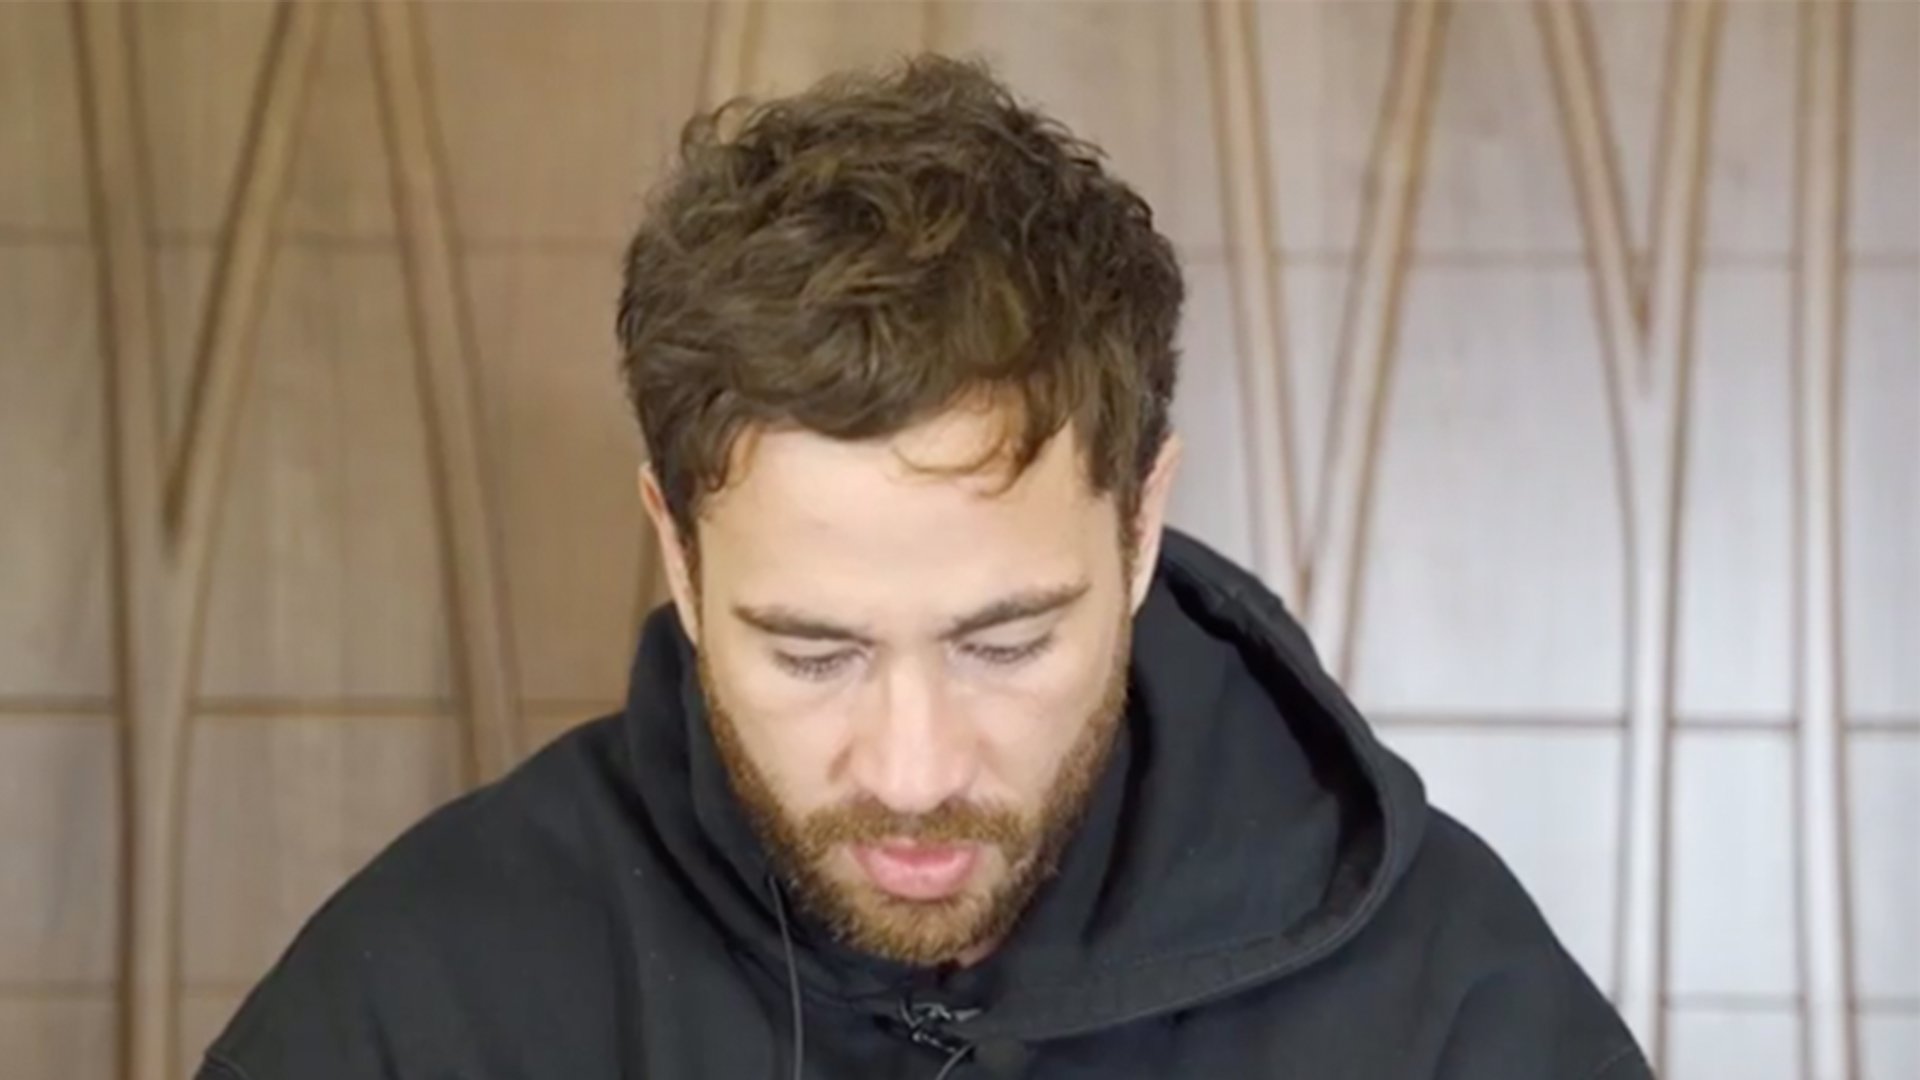 Danny Cipriani posts incredibly emotional confession video in response to the death of his dear friend